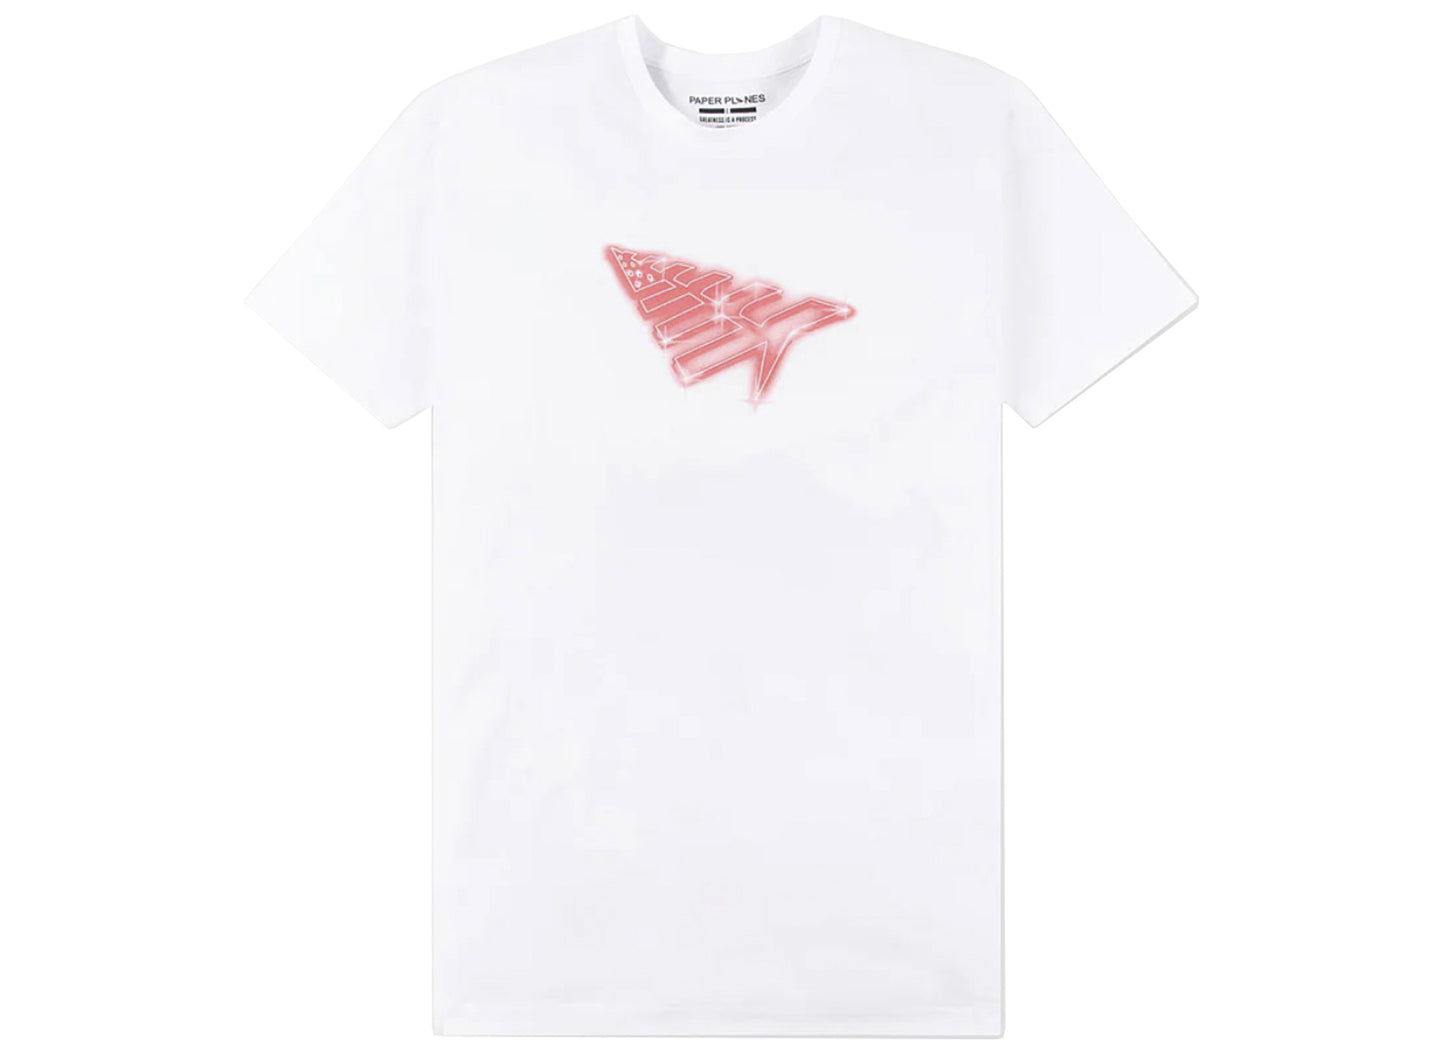 Paper Planes City Light Tee in White